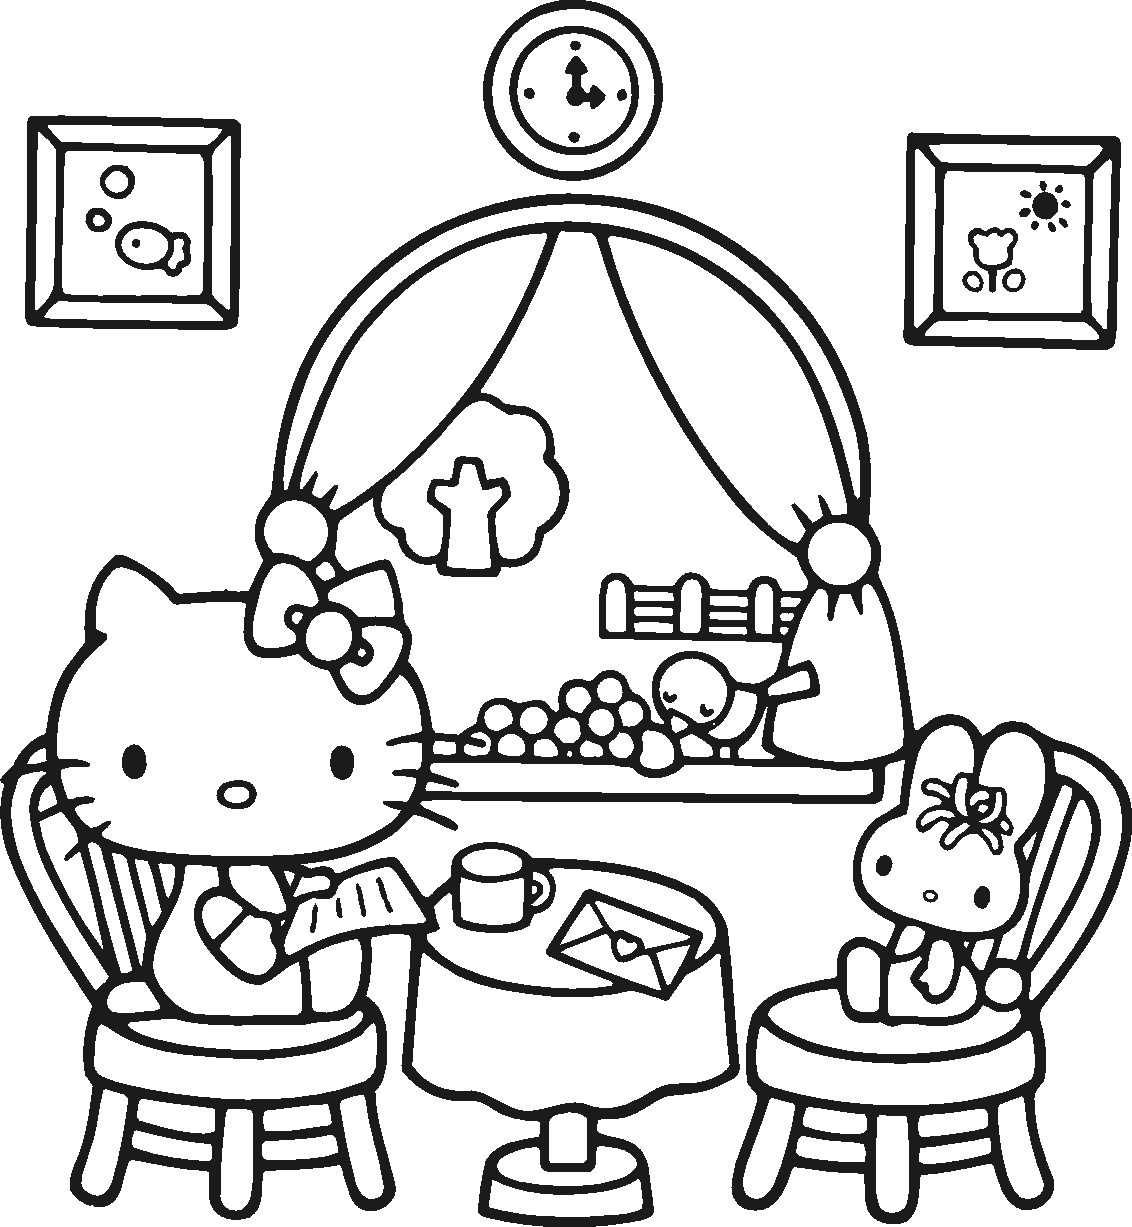 Download Hello Kitty Coloring Pages